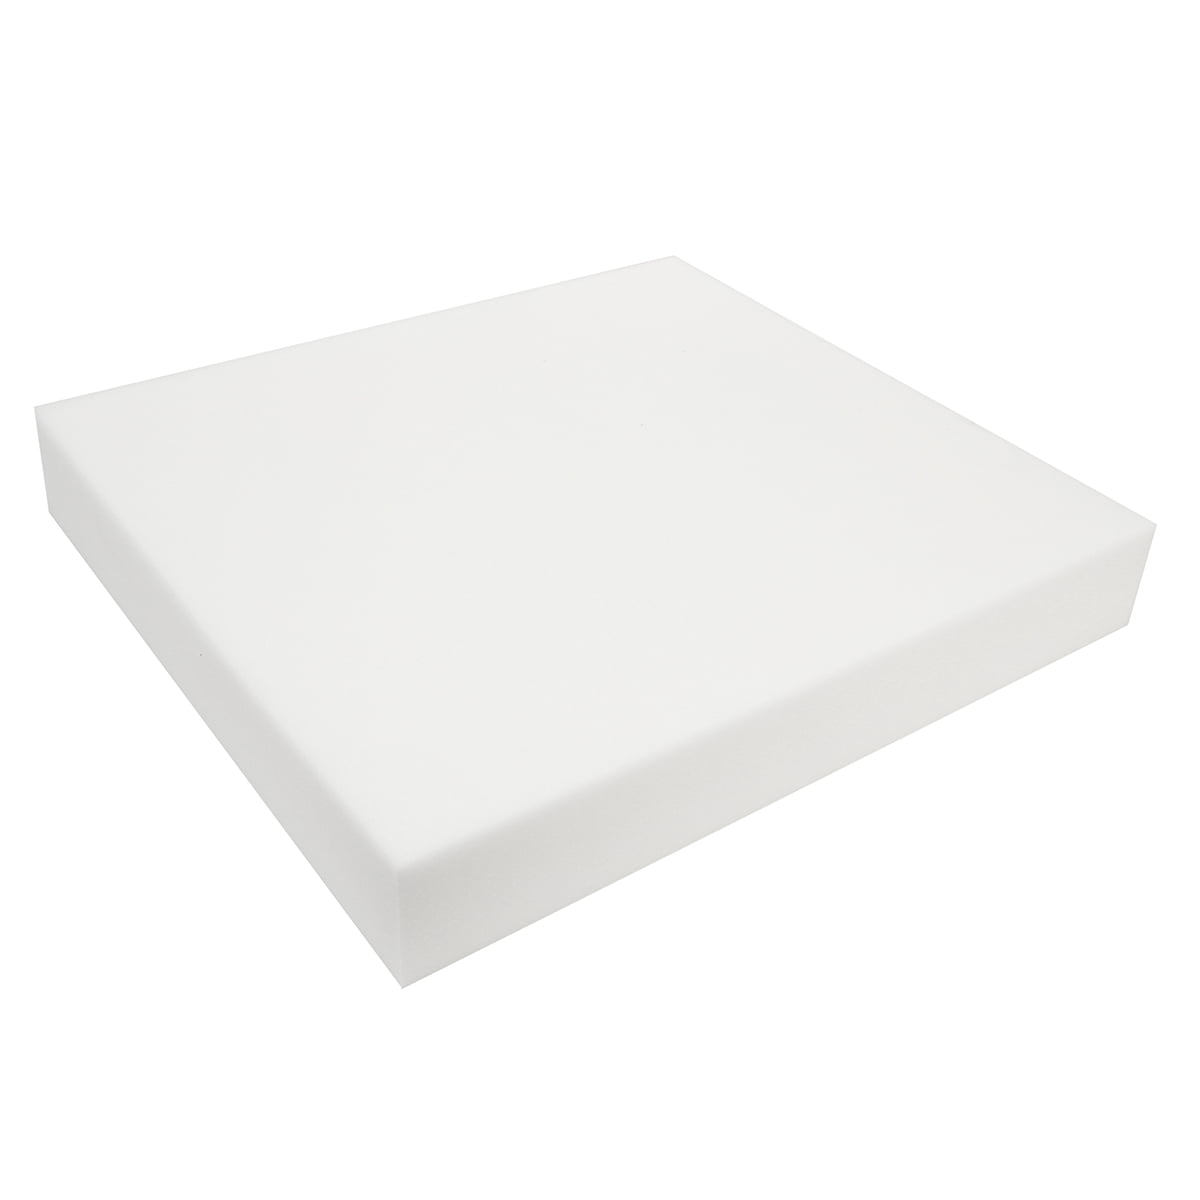 12'' Square High Density Seat Foam Cushion Sheet Upholstery Replacement Pad 